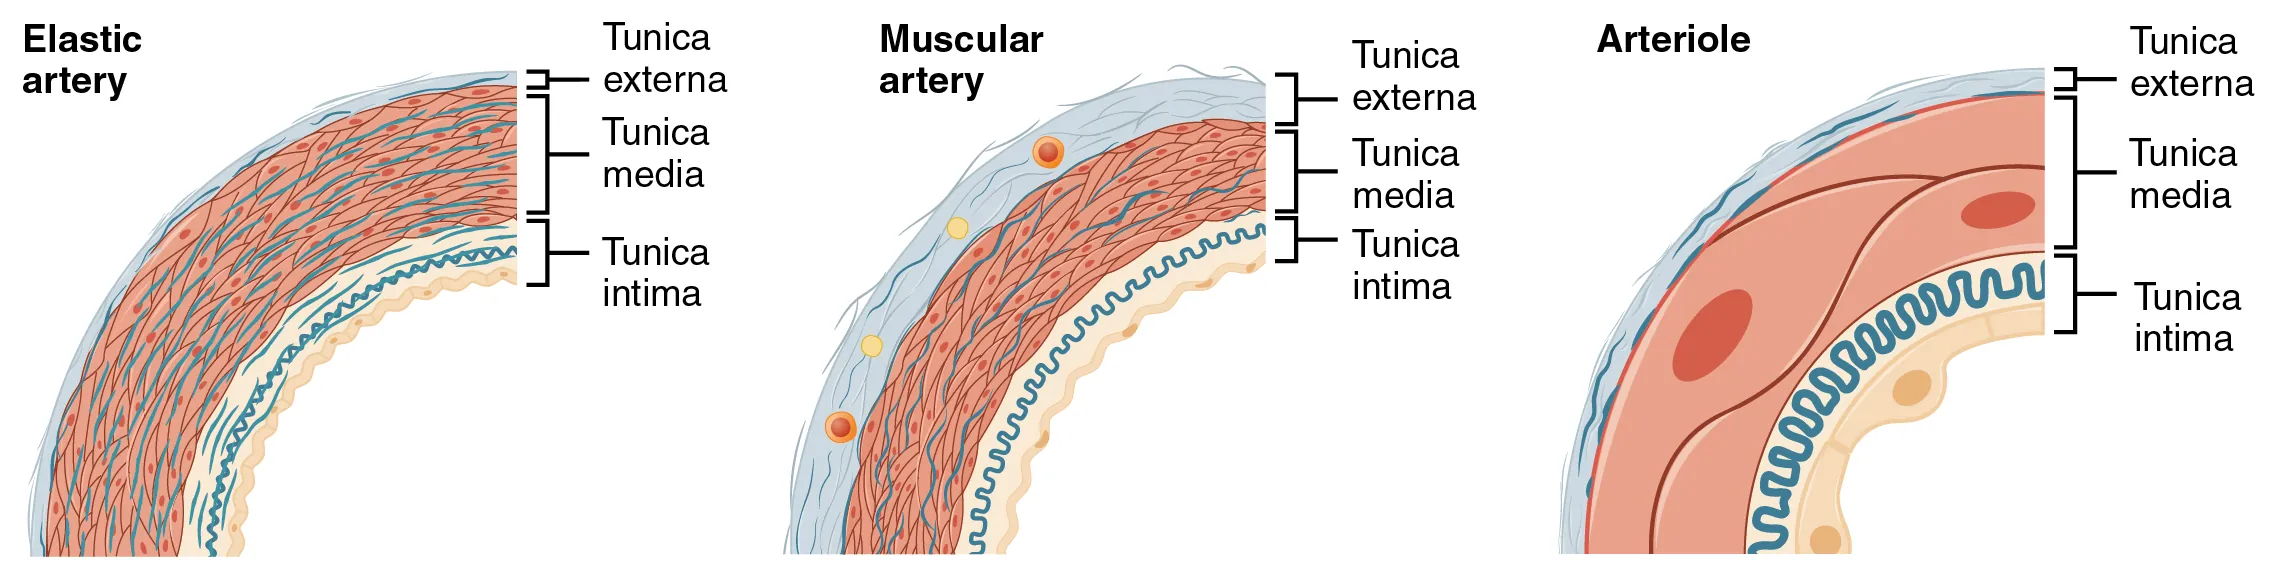 The left panel shows the cross-section of an elastic artery, the middle panel shows the cross section of a muscular artery, and the right panel shows the cross-section of an arteriole.